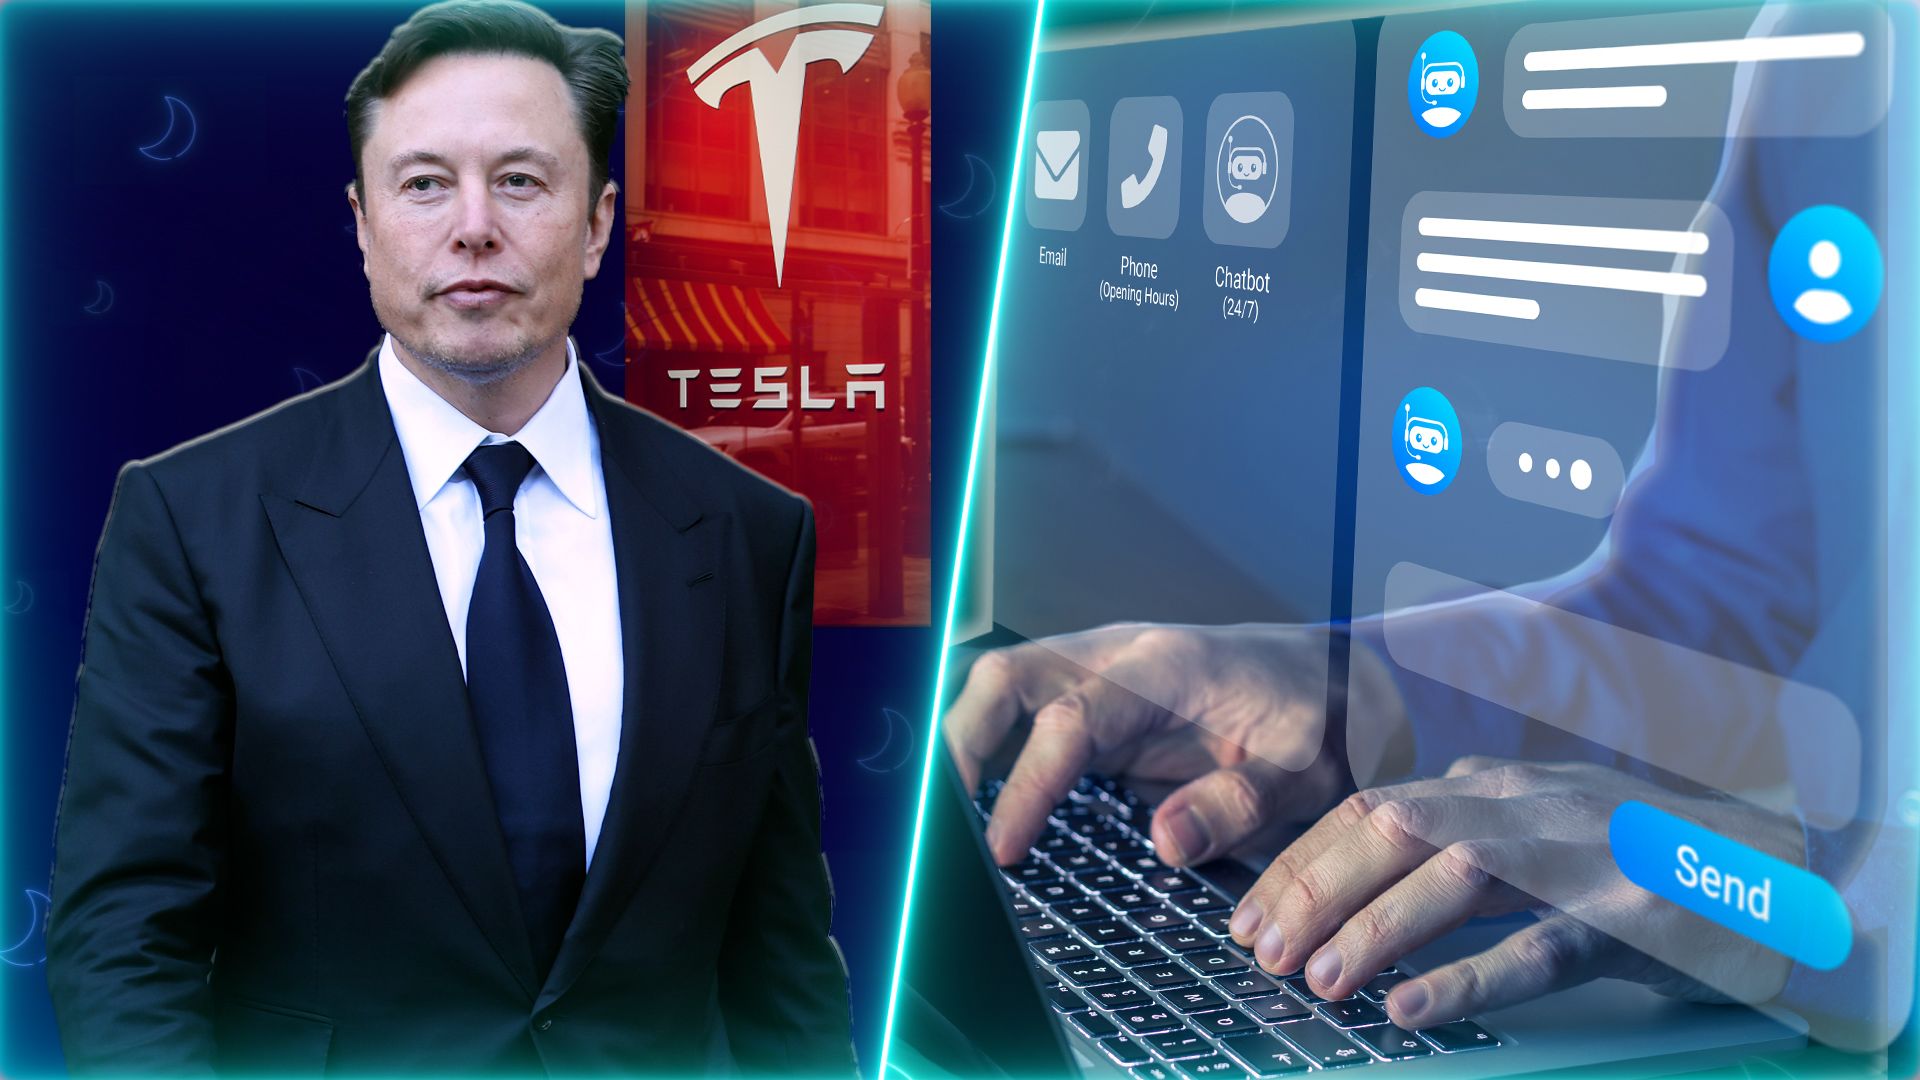 Calaméo - Participate Now and Win Up To $150,000 USD - $700,000 USD with  Tesla Charity.